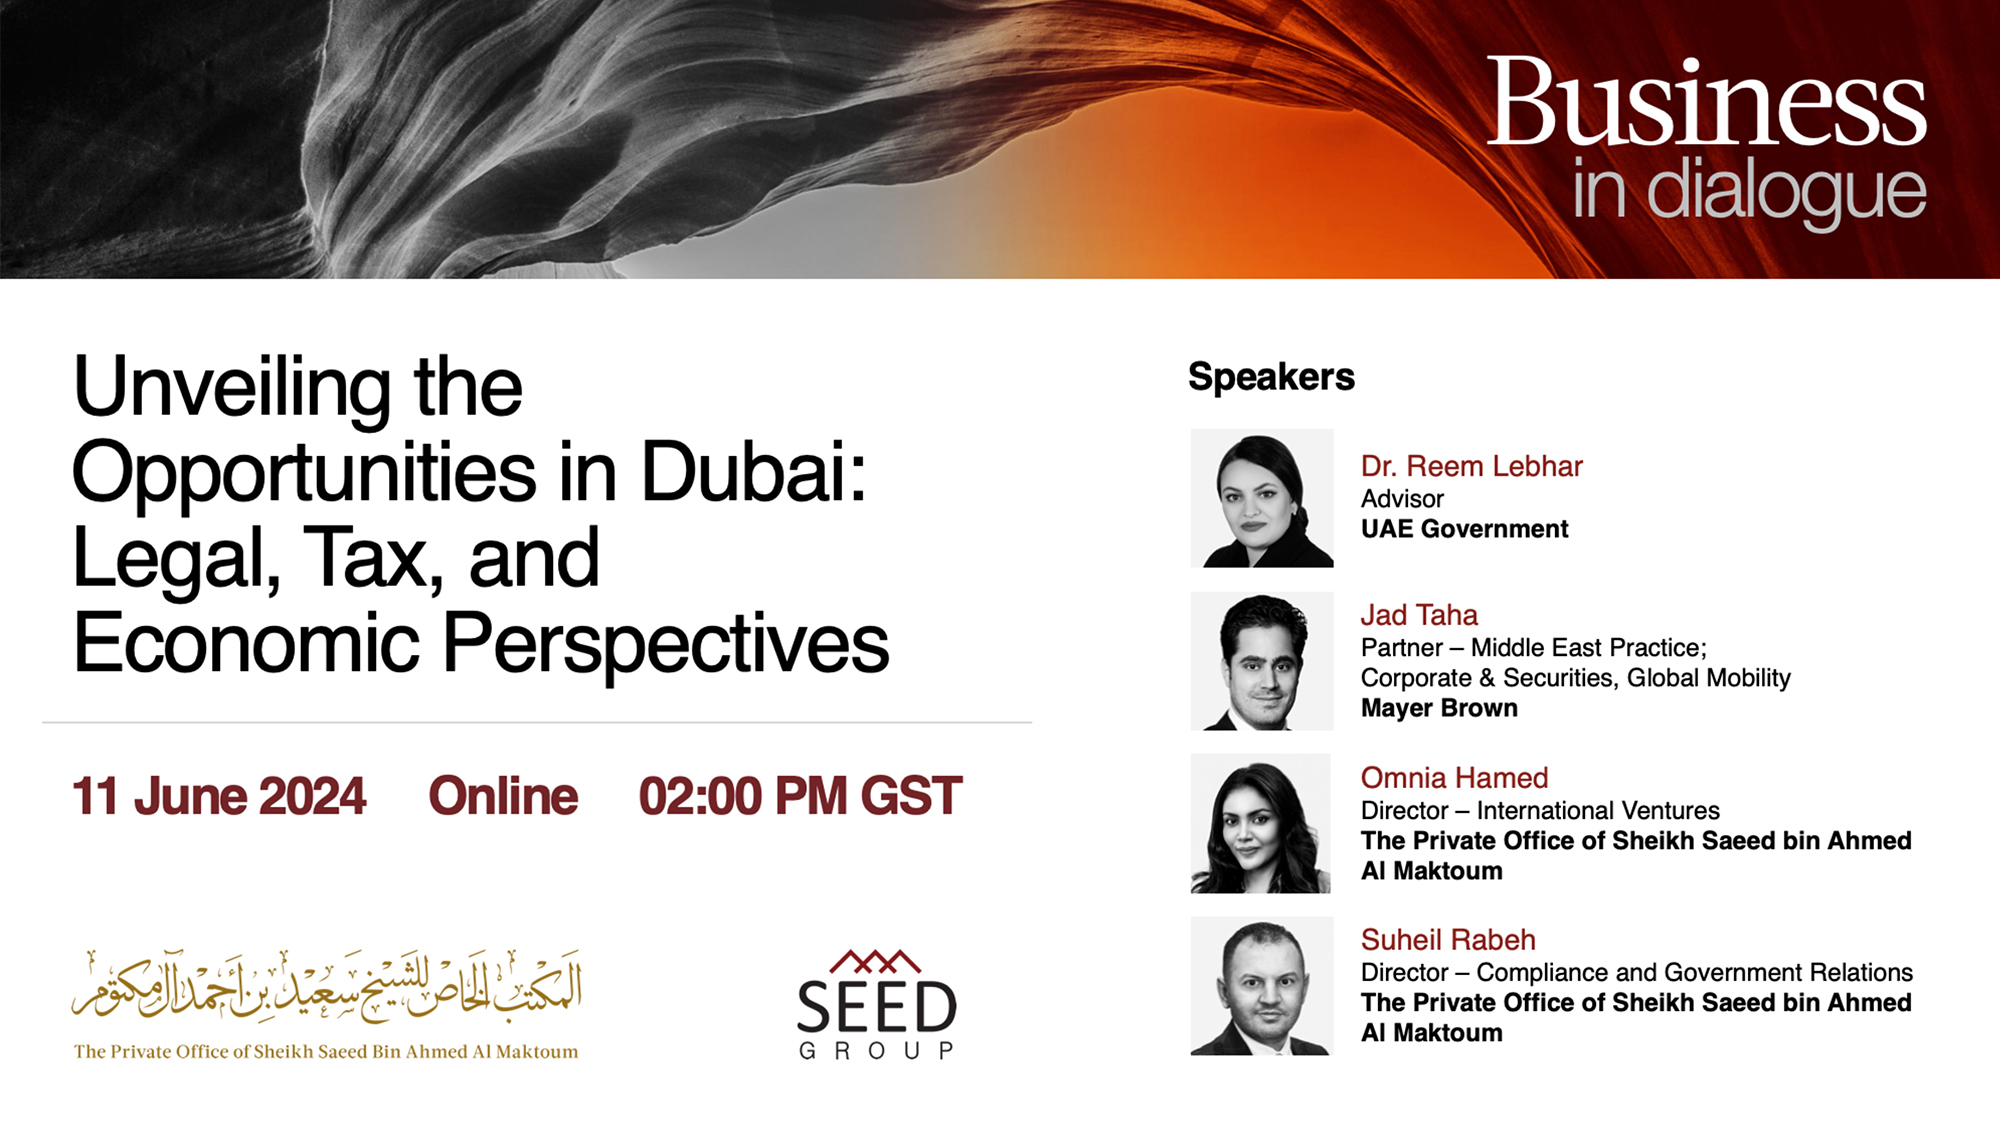 [Webinar] Unveiling the Opportunities in Dubai: Legal, Tax, and Economic Perspectives